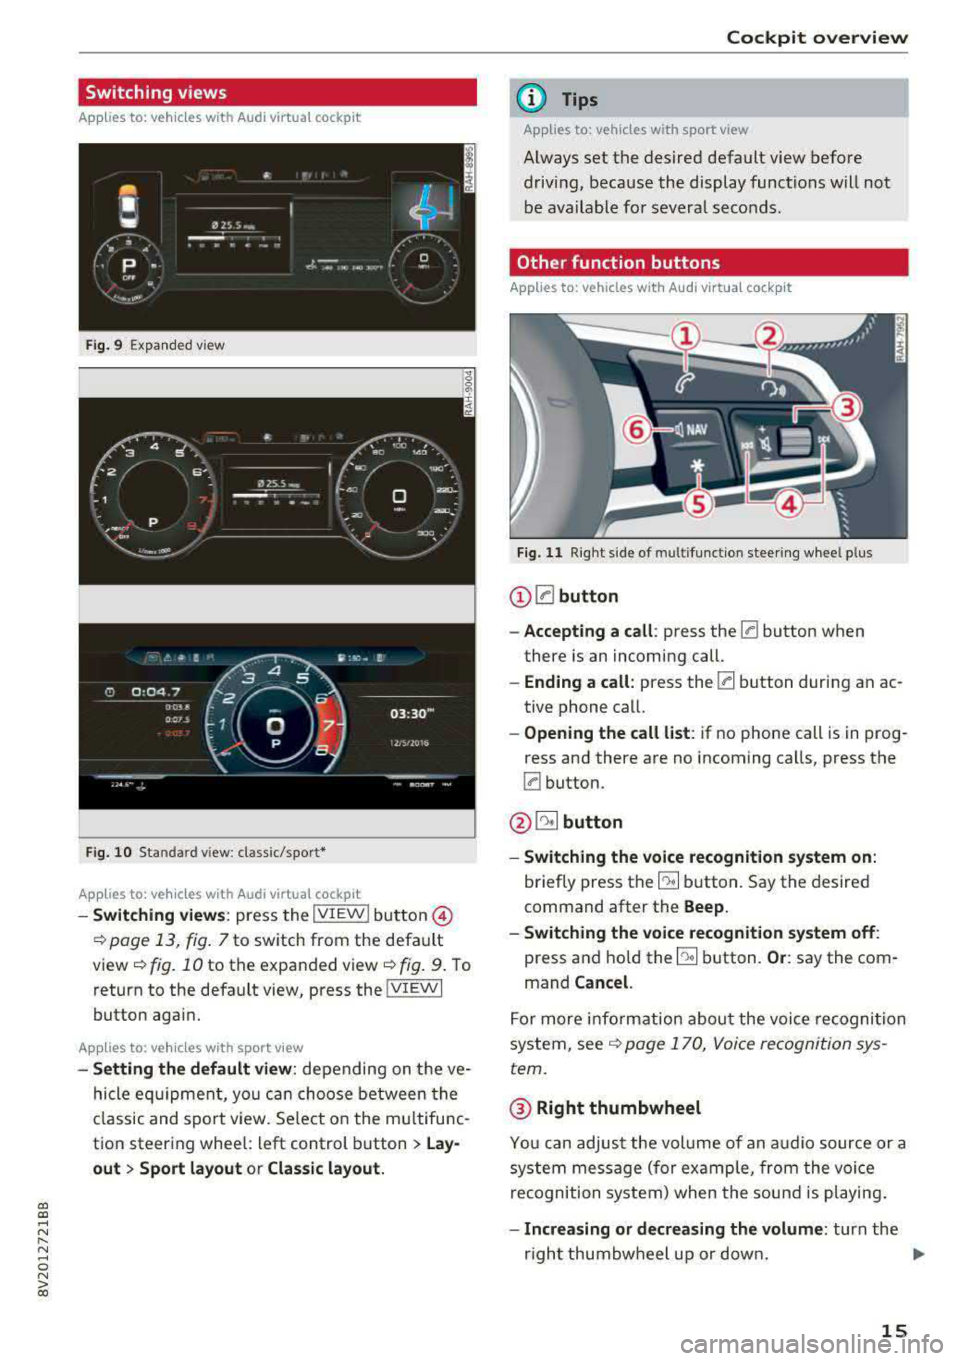 AUDI A3 SEDAN 2017 User Guide a,  a, ..... N 
" N ..... 0 N > 00 
Switching  views 
Applies  to: vehicles with  Audi virtual  cockpit 
Fig. 9 Expa nded v iew 
F ig.  10 Sta ndard  view : class ic/spor t• 
Applies  to:  vehicles 